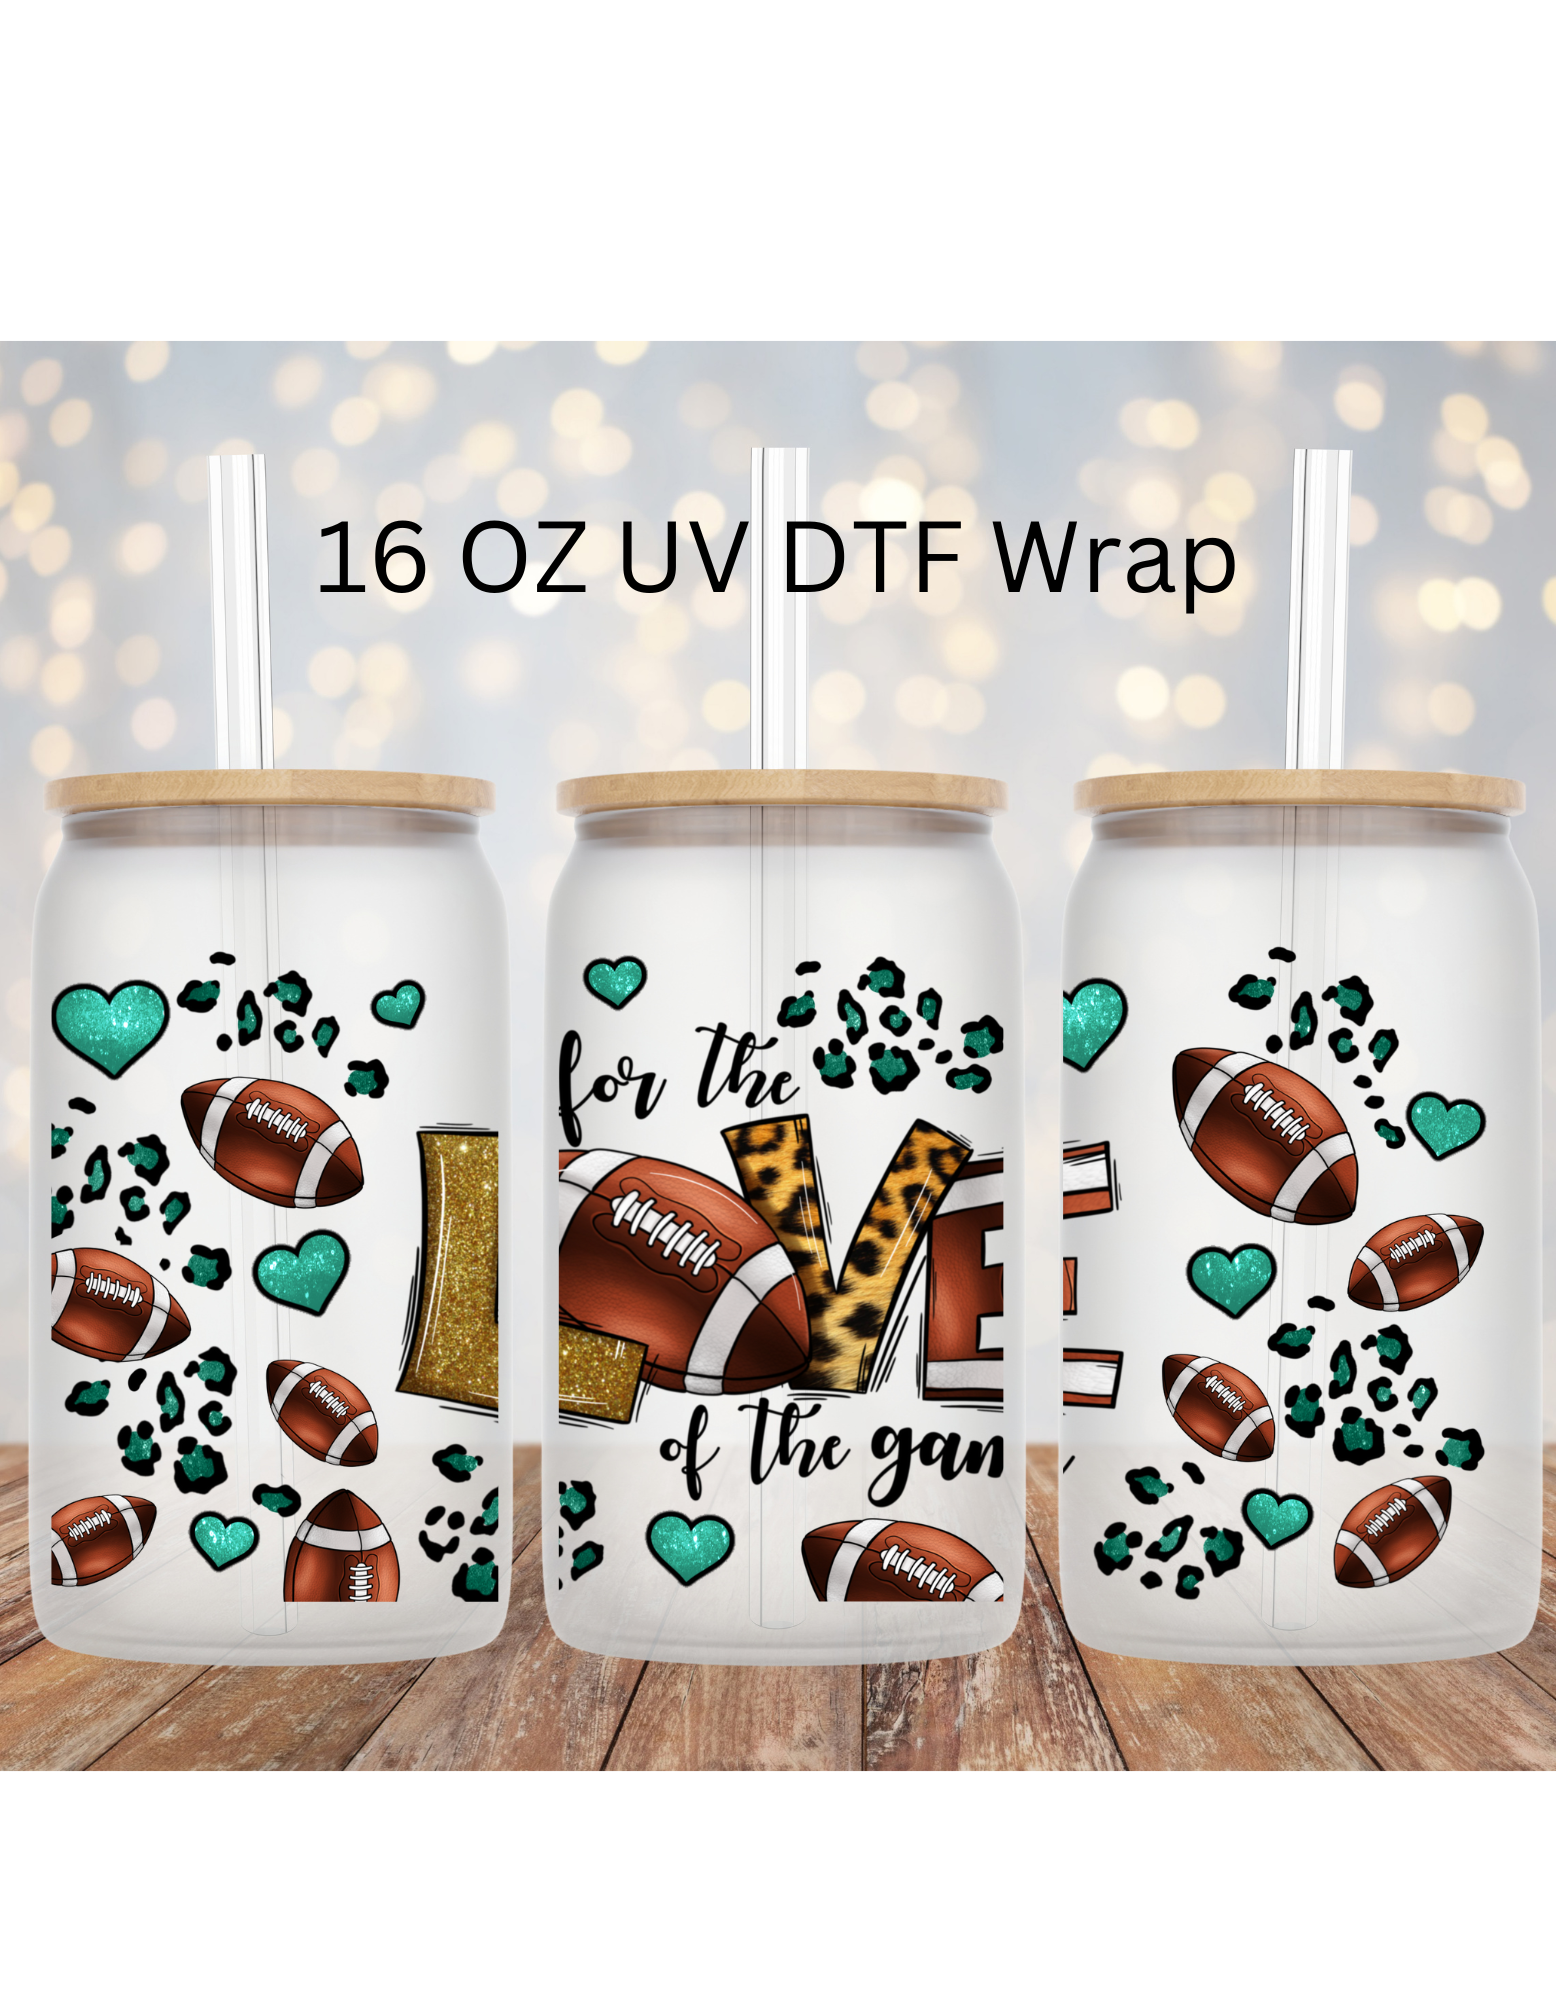 Rngmsi UV DTF Cup Wrap Transfer Stickers 8 Sheets Valentines Day Uvdtf Cup  Wraps Red Heart Dwarf UV DTF Wraps Waterproof UV DTF Cup Wraps for 16 oz